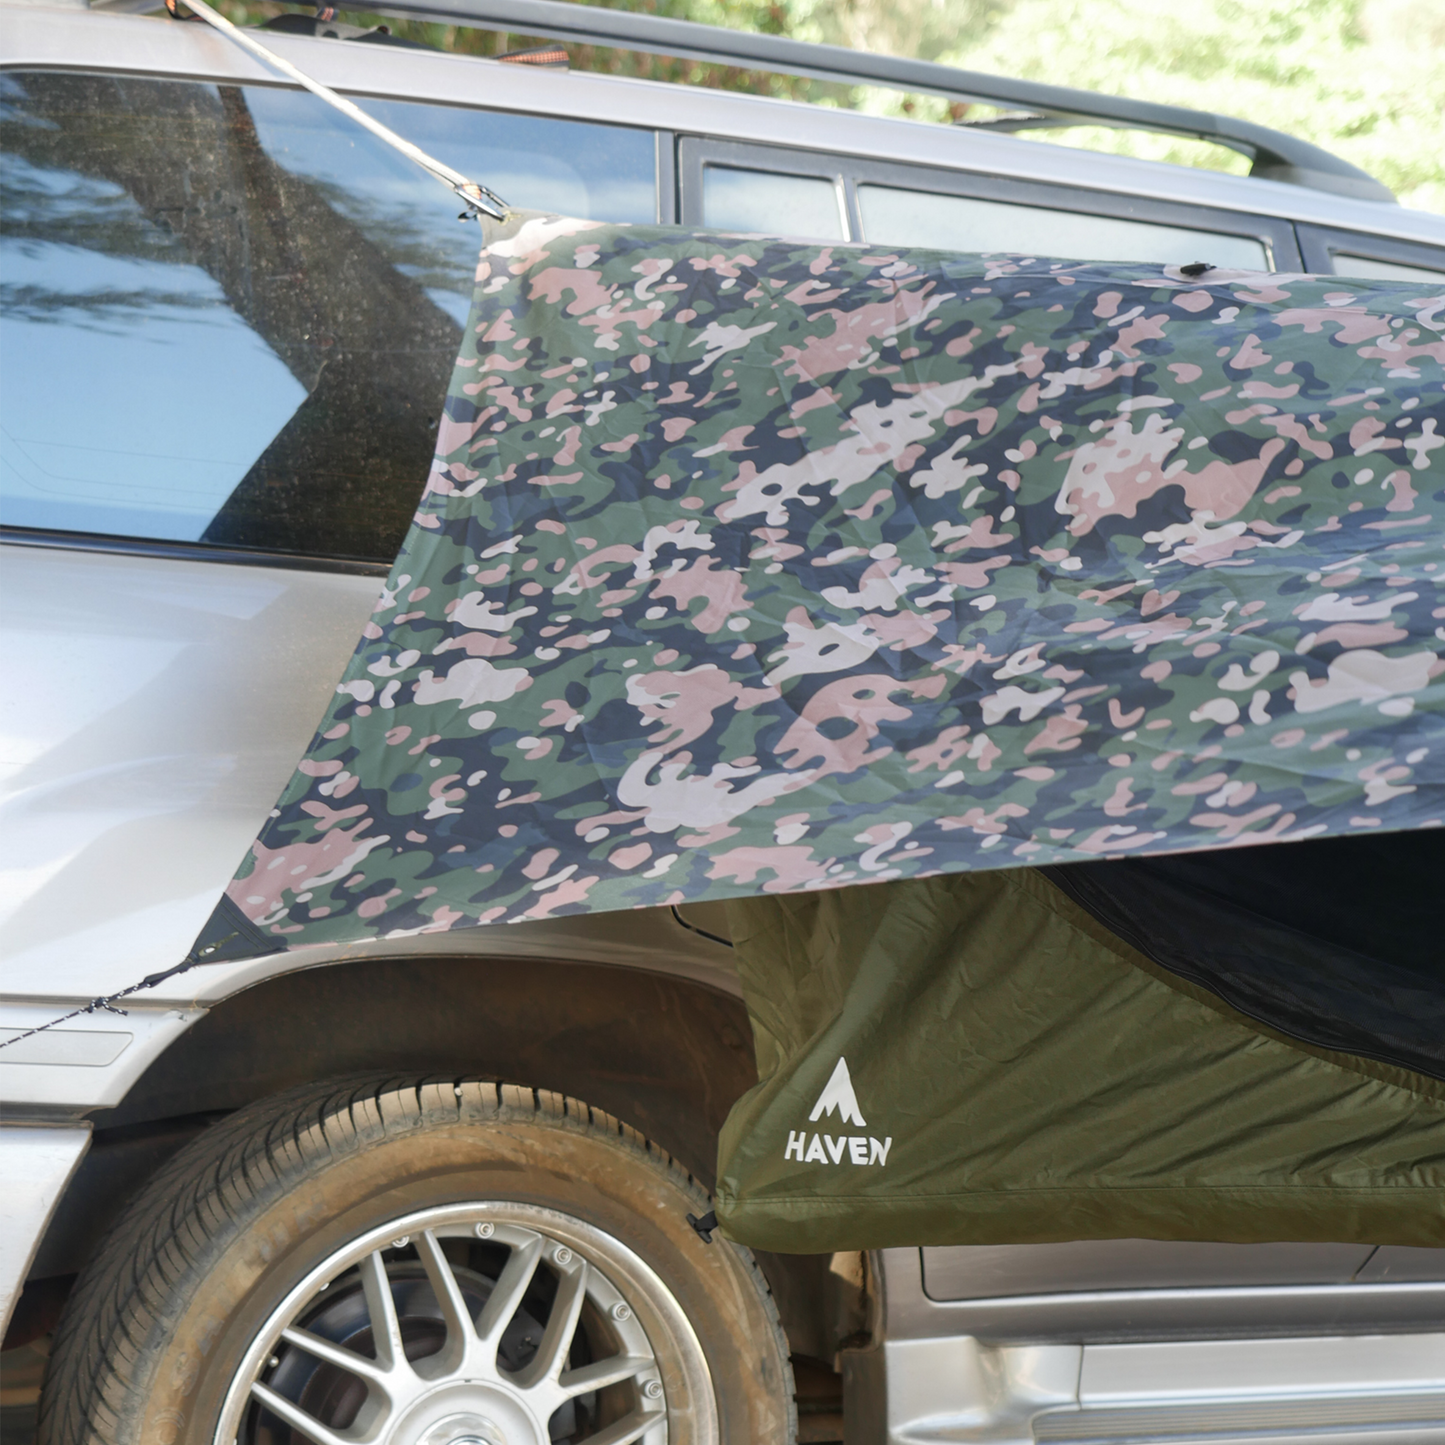 Camouflage hammock tent hanging from a car roof rack